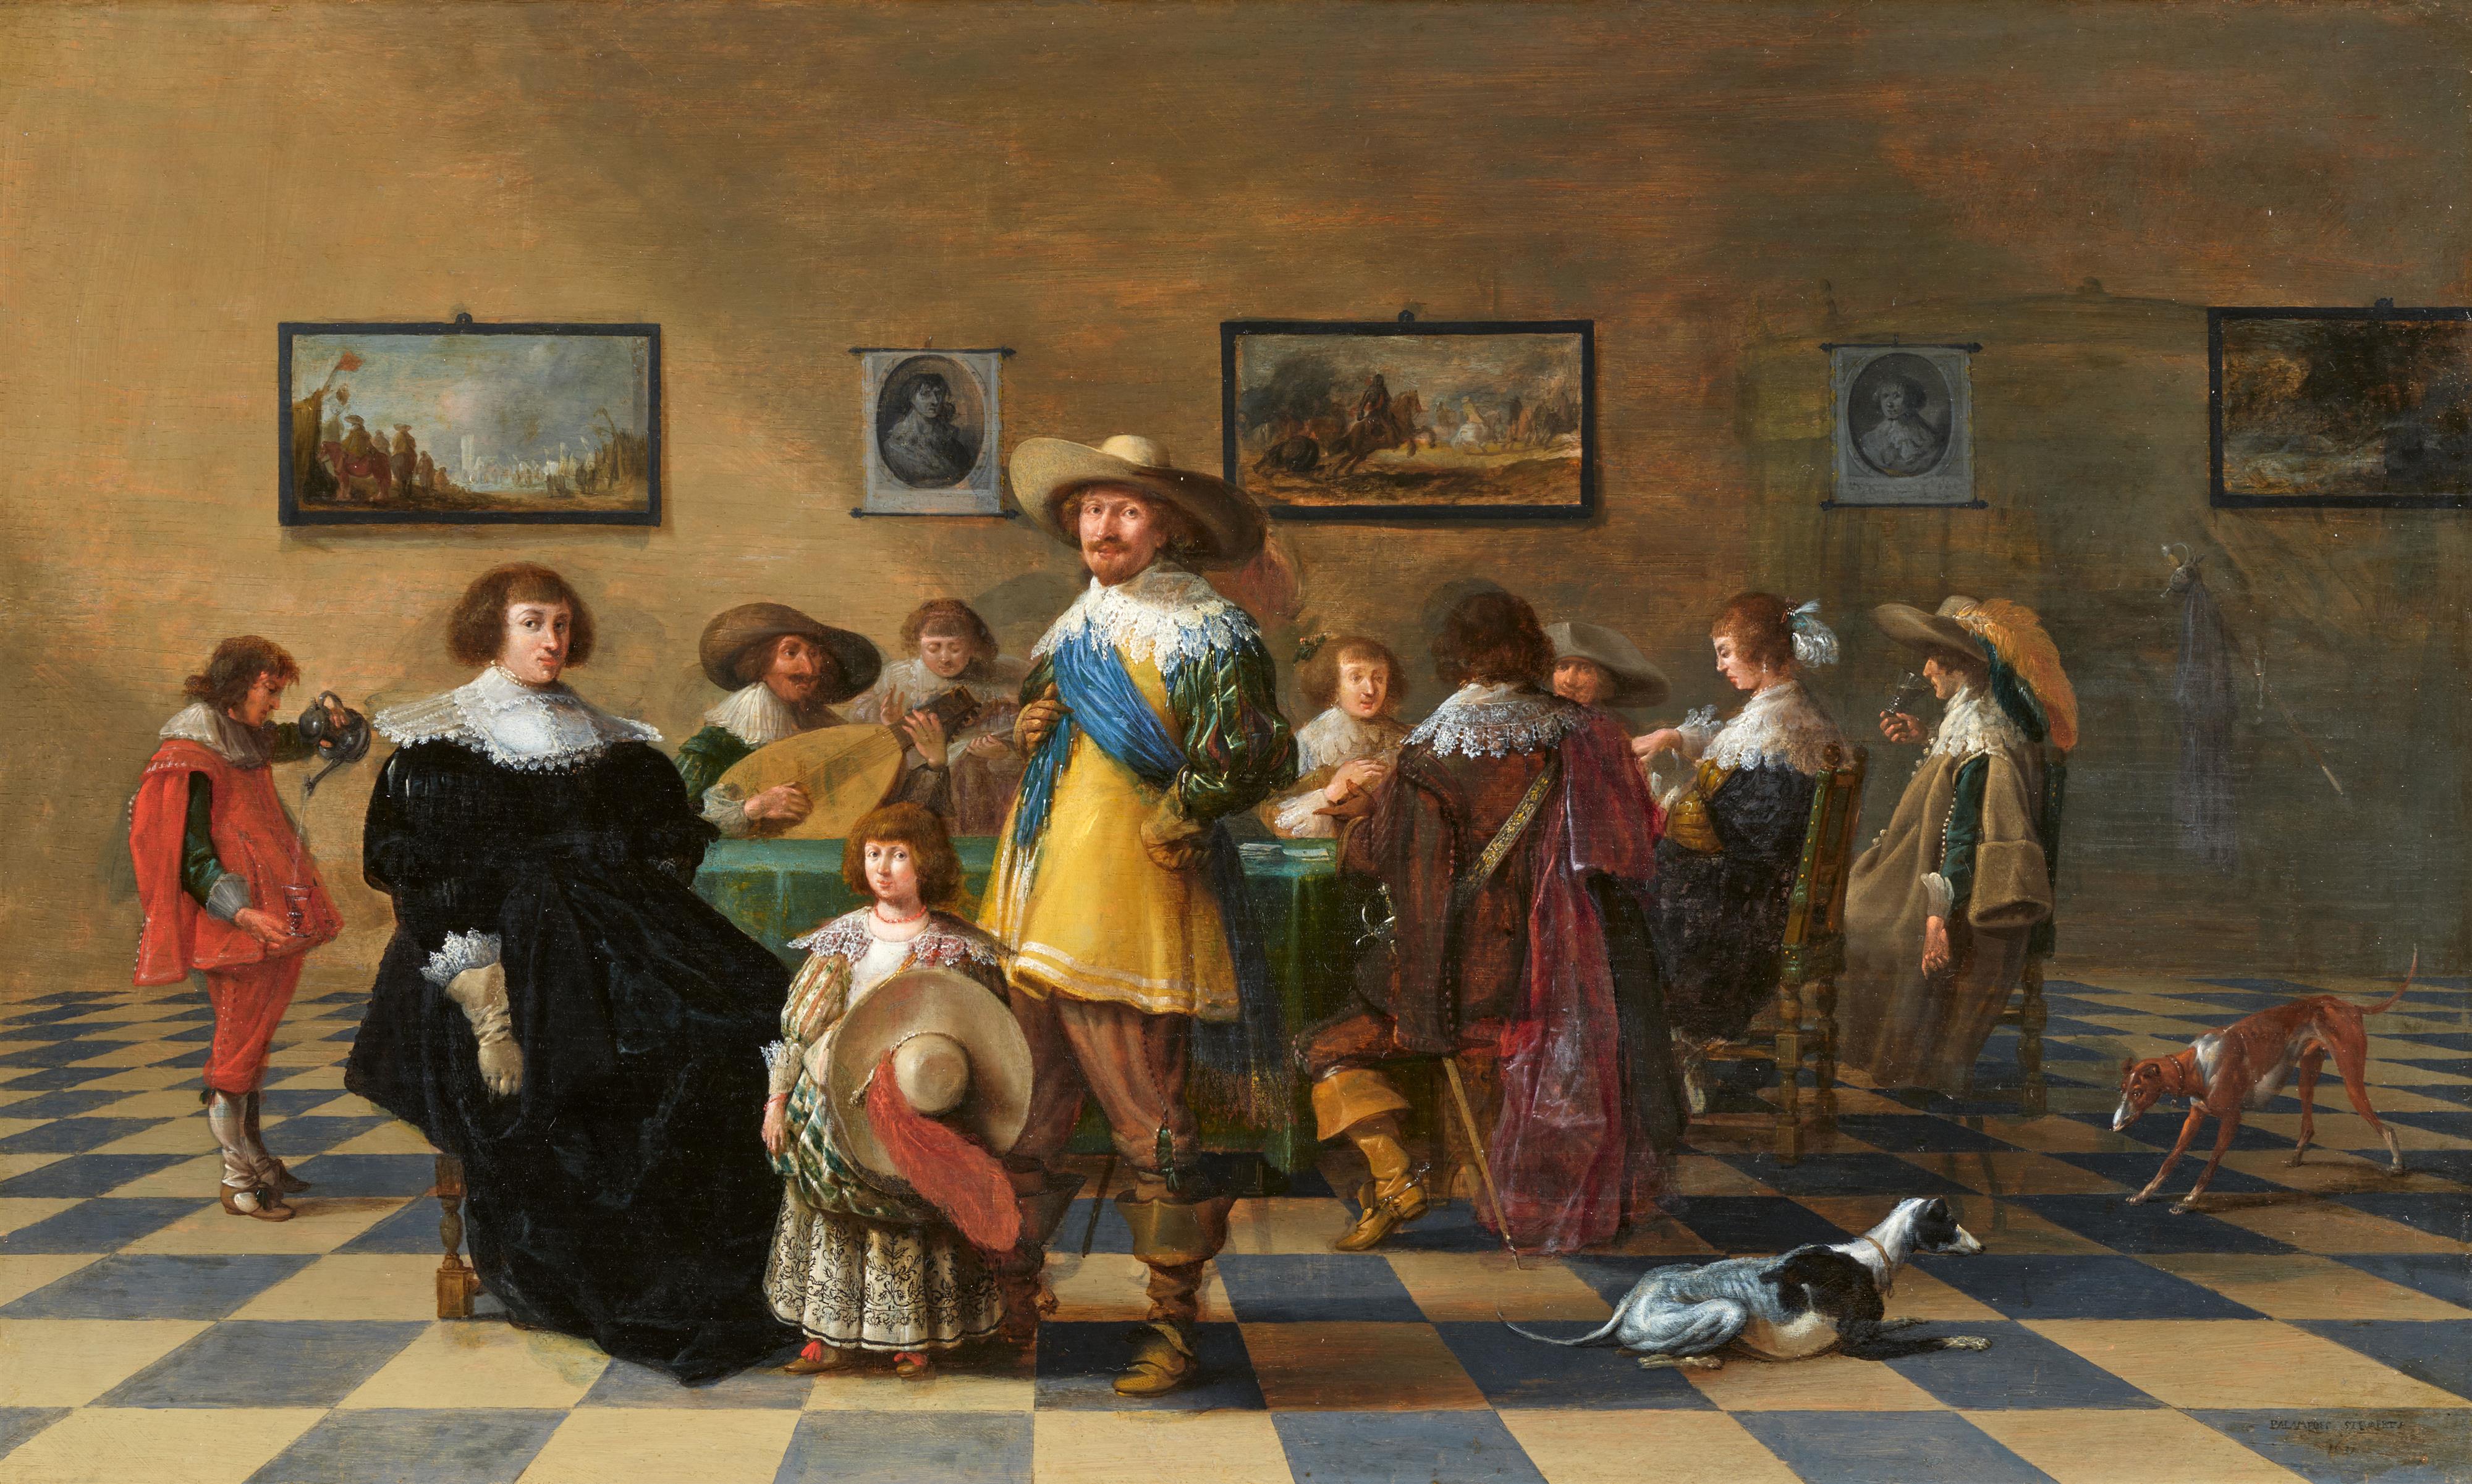 Palamedes Palamedesz. - Merry Company in an Interior - image-1